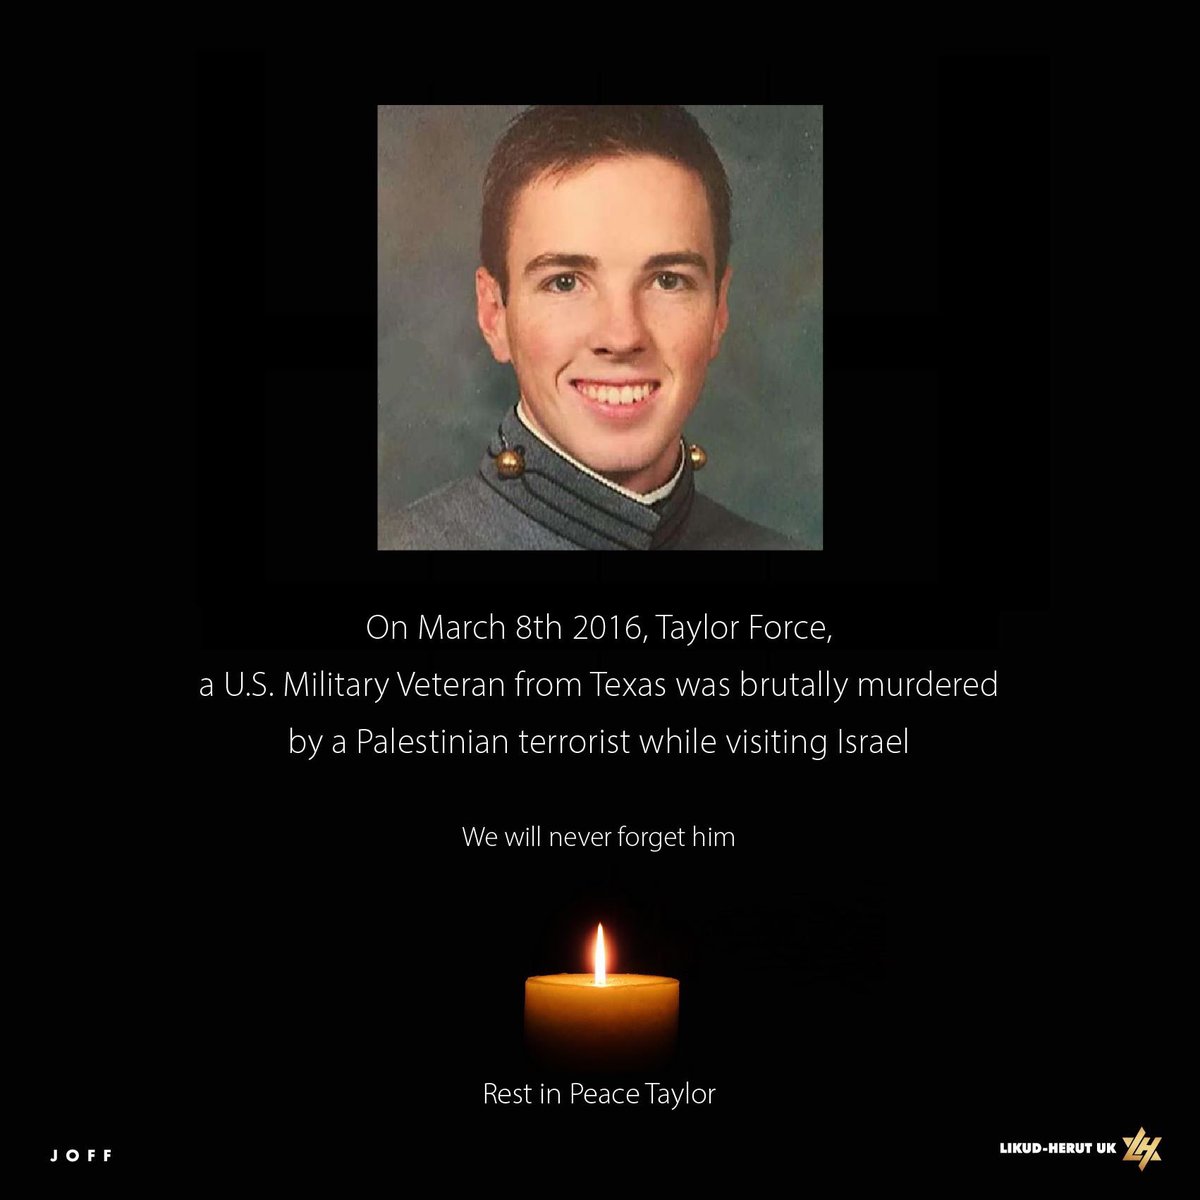 #OTD we remember Taylor Force, who was brutally attacked and murdered by a Palestinian terrorist on March 8th 2016 while on a fact-finding mission to Israel. We will never forget you Taylor. Rest in Peace.#TaylorForceAct